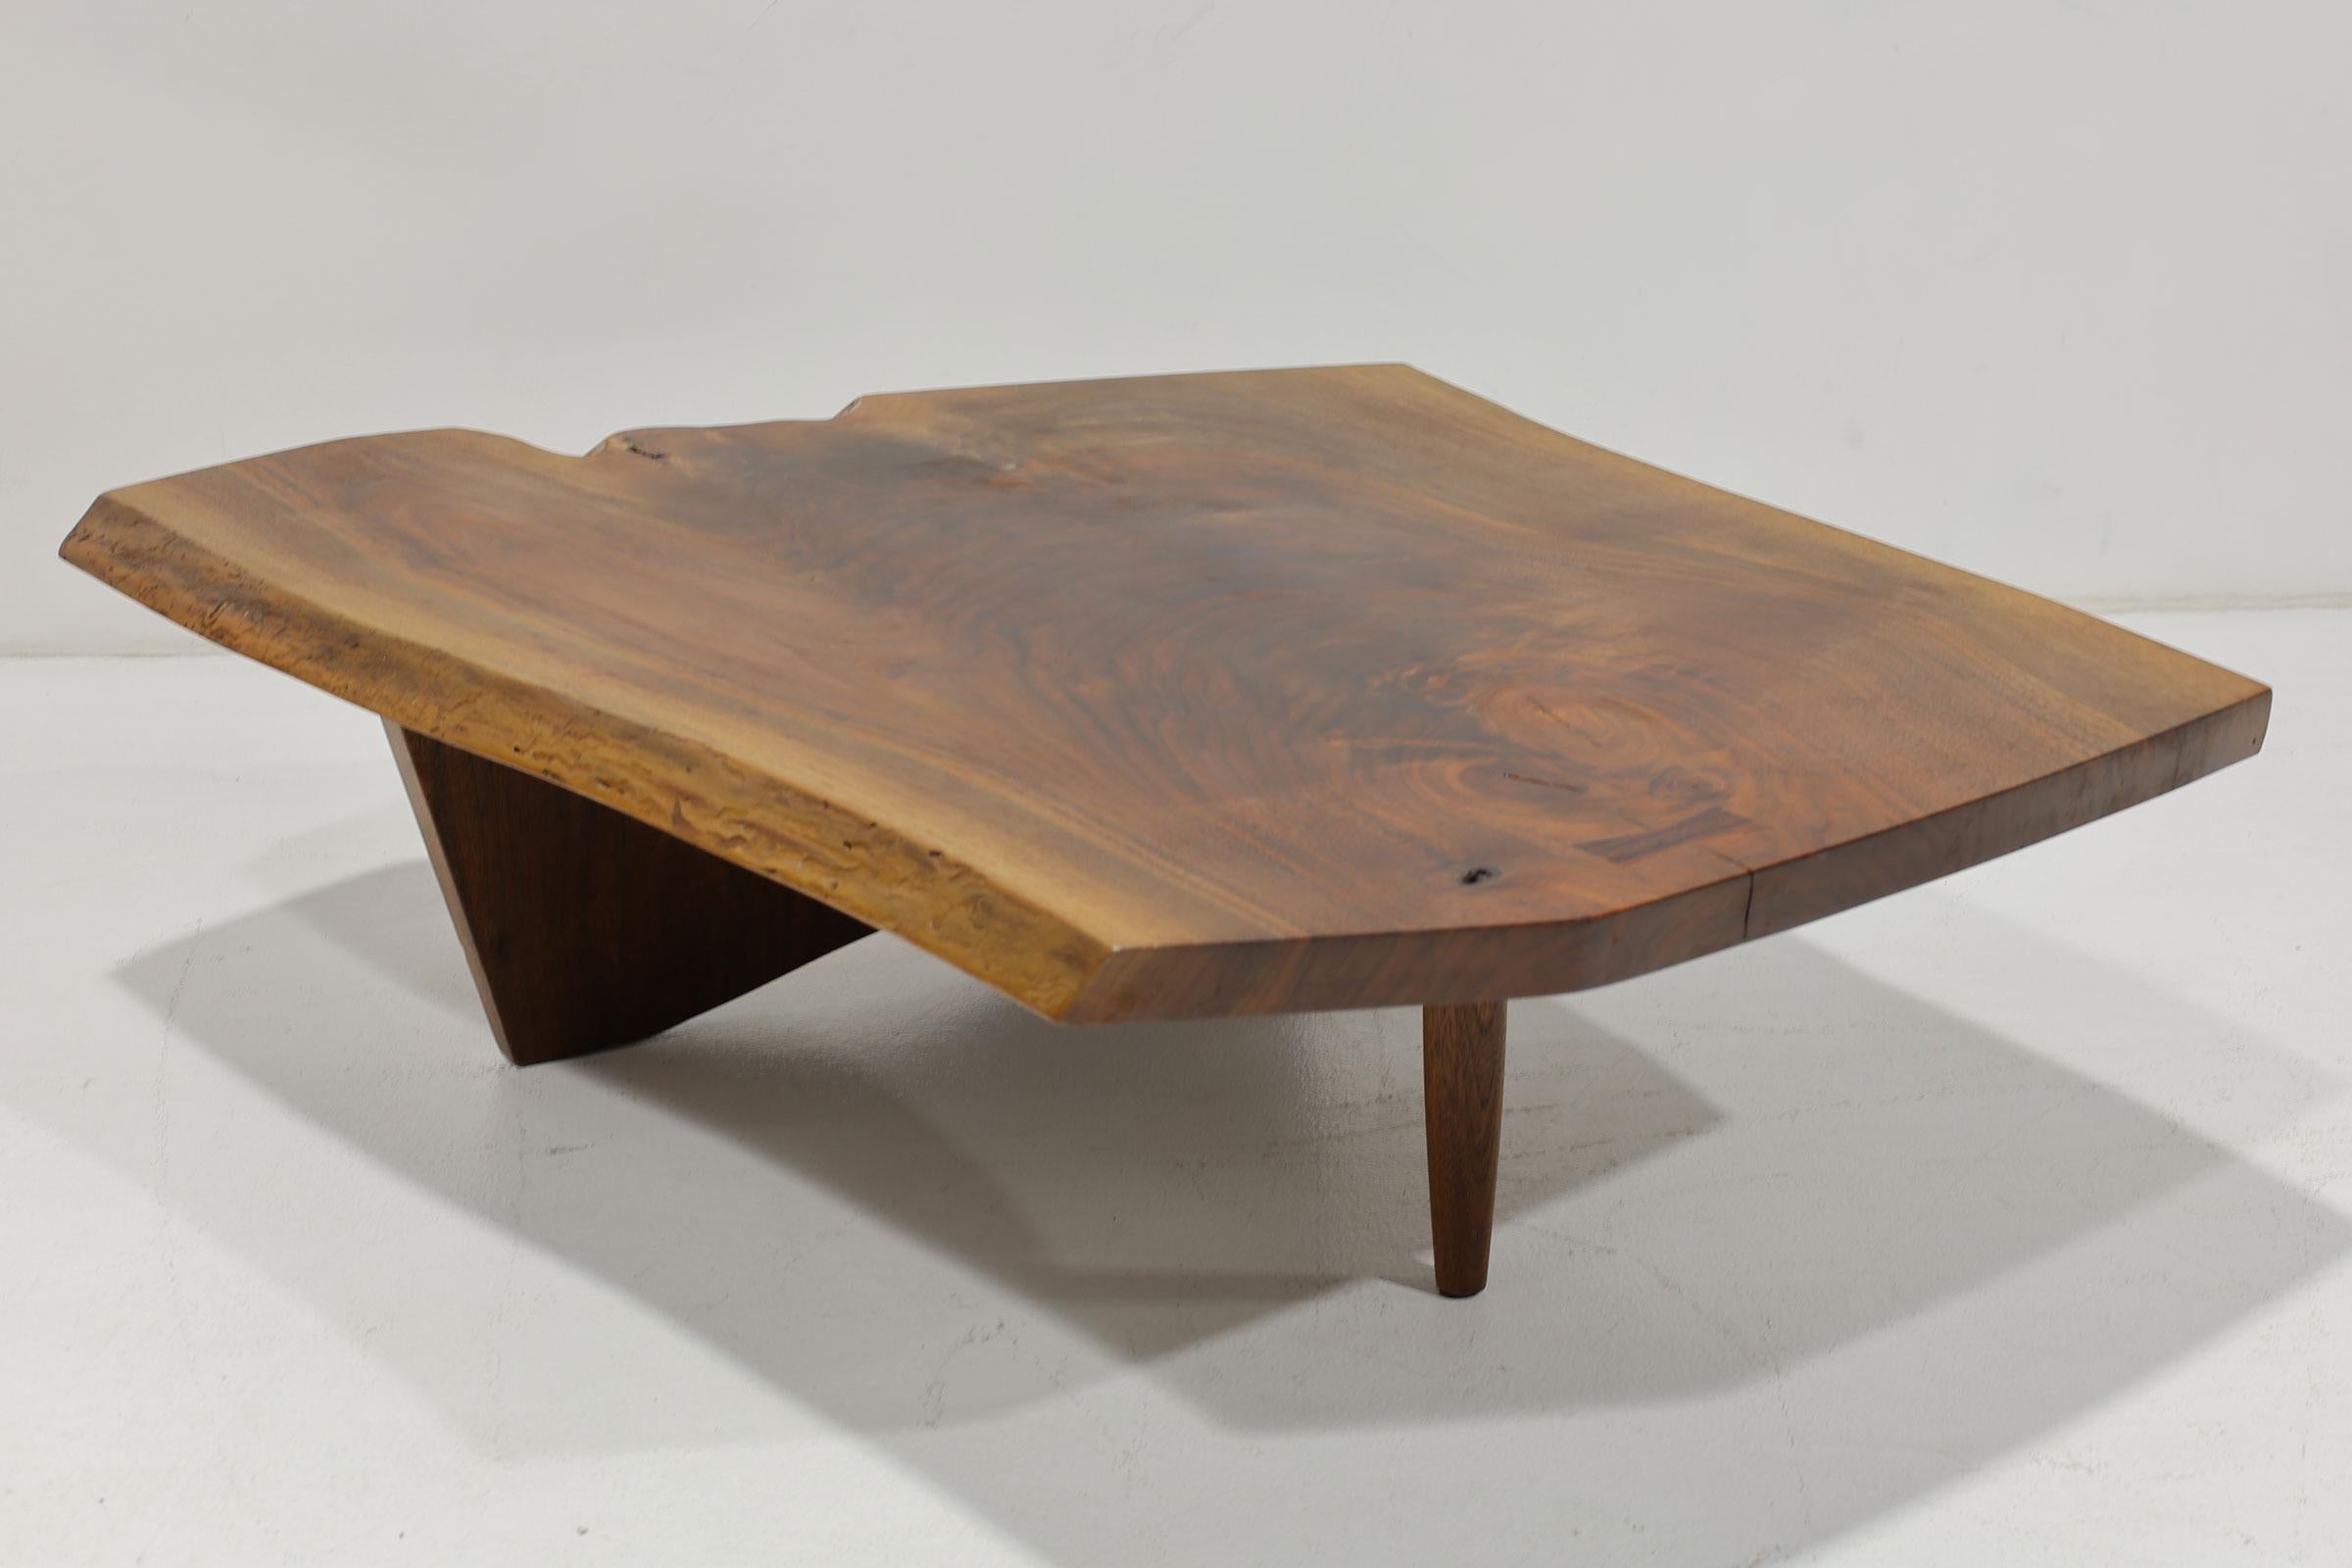 Table features a single slab top with free edges, sap grain, knot detail, and one rosewood butterfly. Signed and dated to underside ‘Mira Nakashima 4-18-00’ with client's name 'Loveland'. Sold with a digital copy of the original receipt.